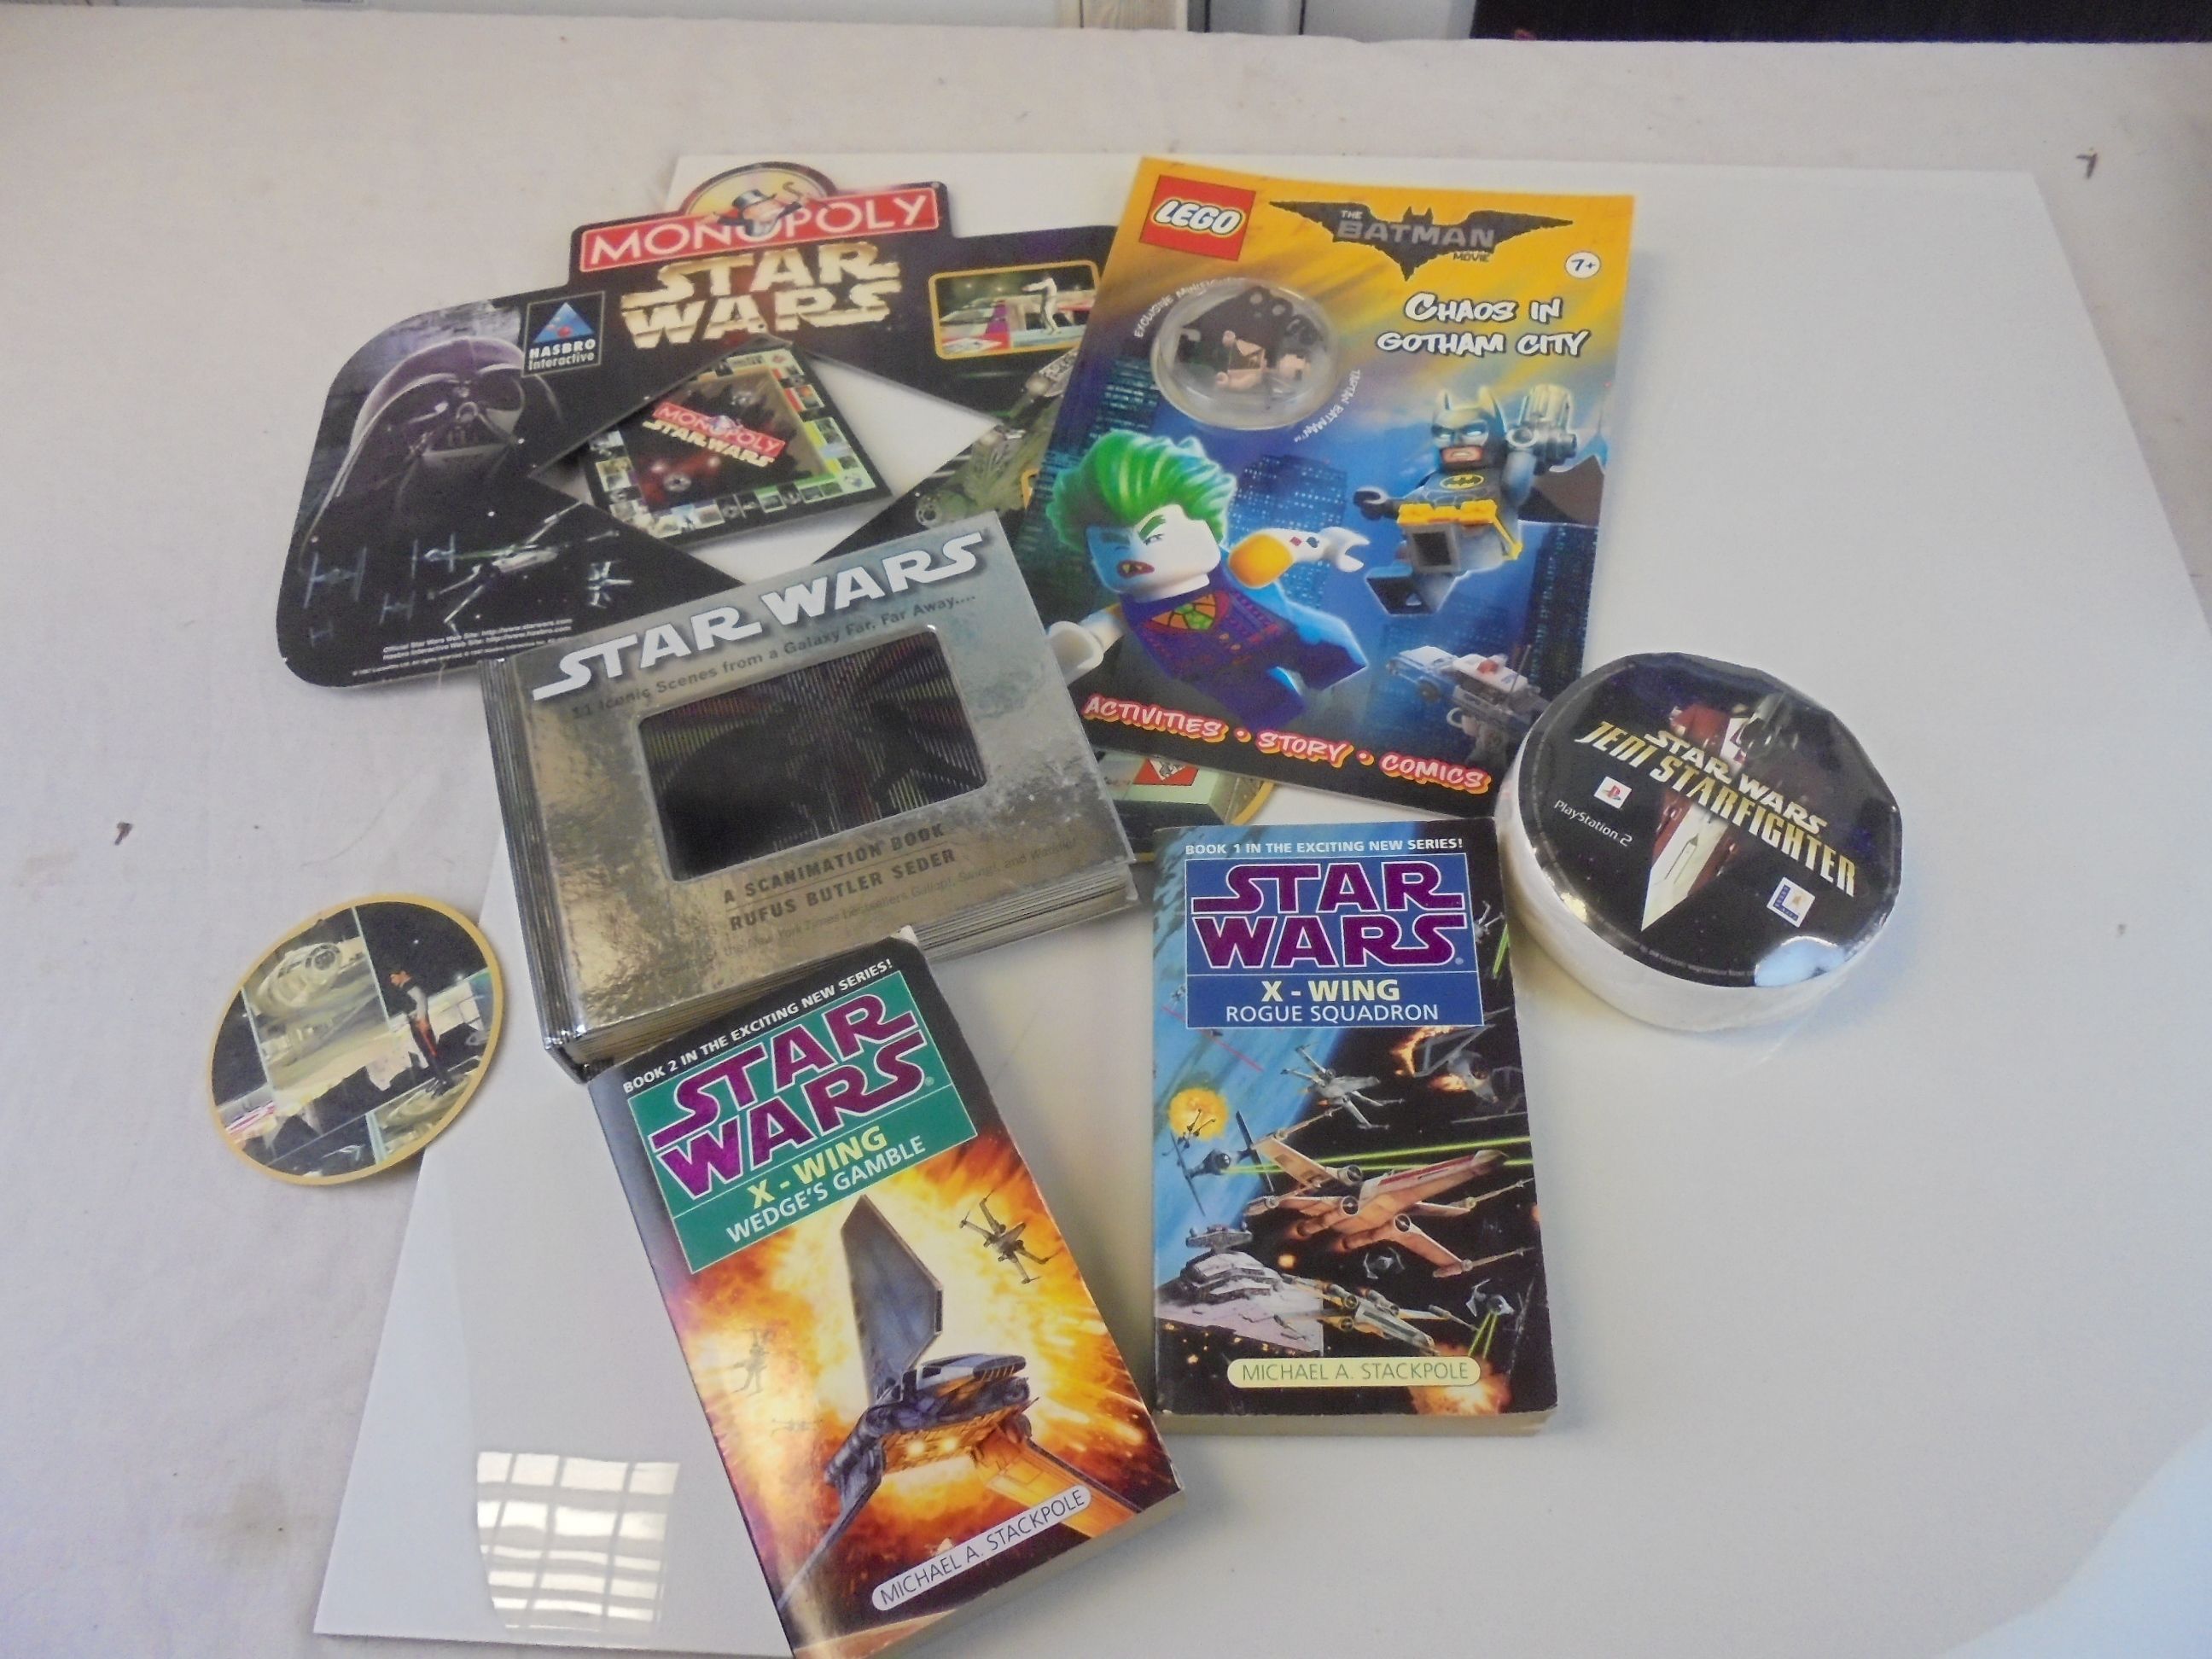 Star Wars - Collection of Various items including Books, Calendars, Magazines, Monoploy Cardboard - Image 3 of 3